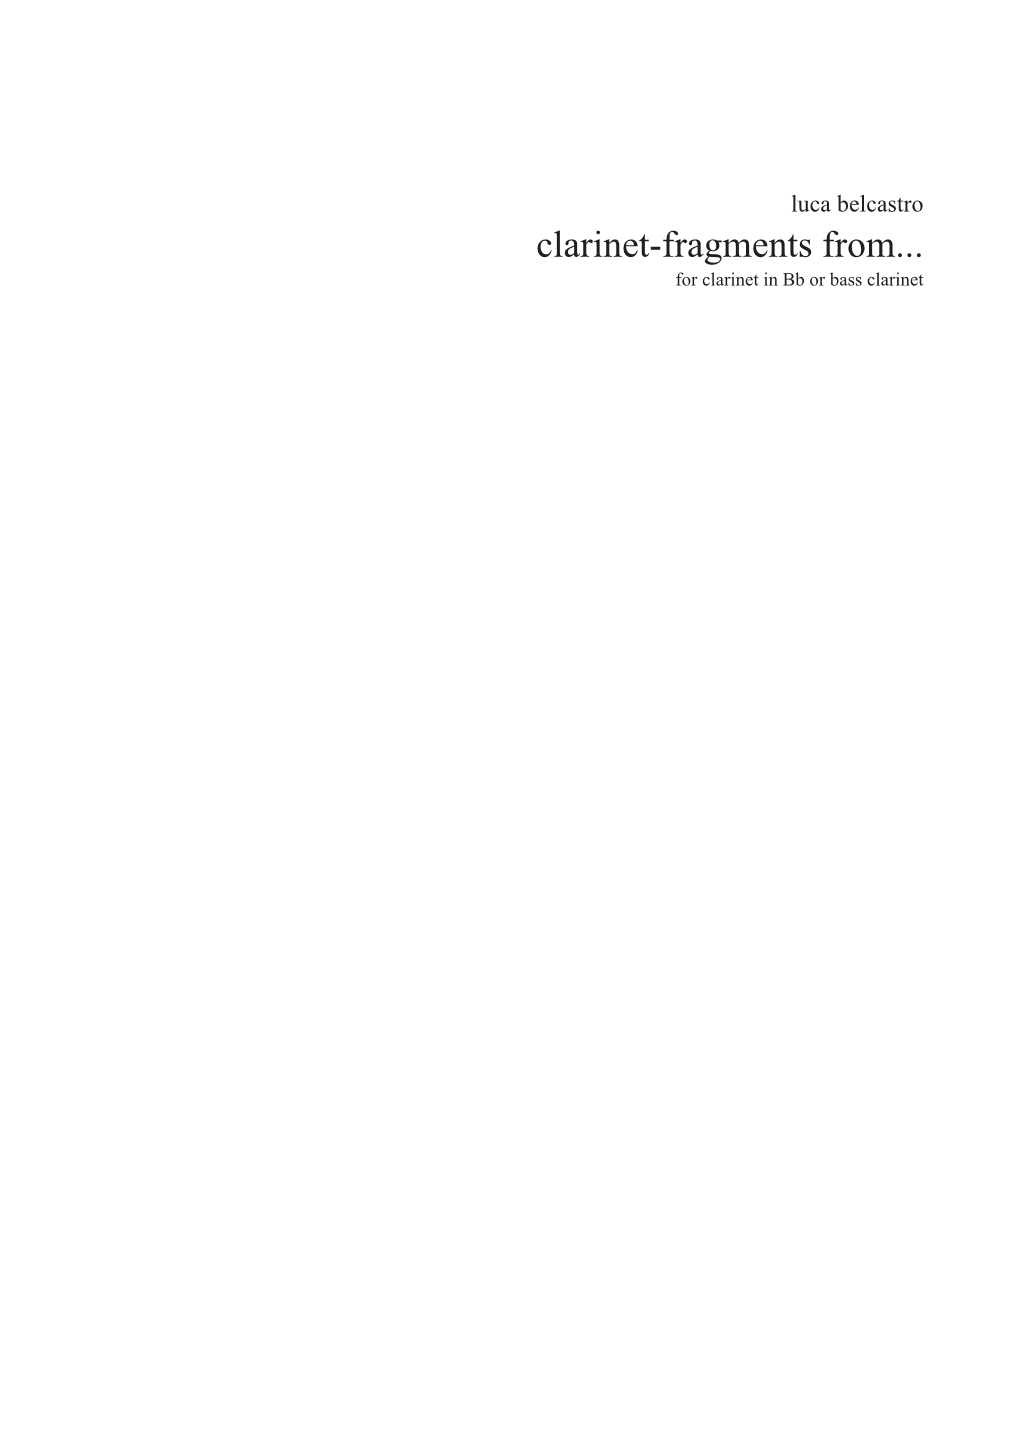 Clarinet-Fragments From... for Clarinet in Bb Or Bass Clarinet Luca Belcastro Clarinet-Fragments From